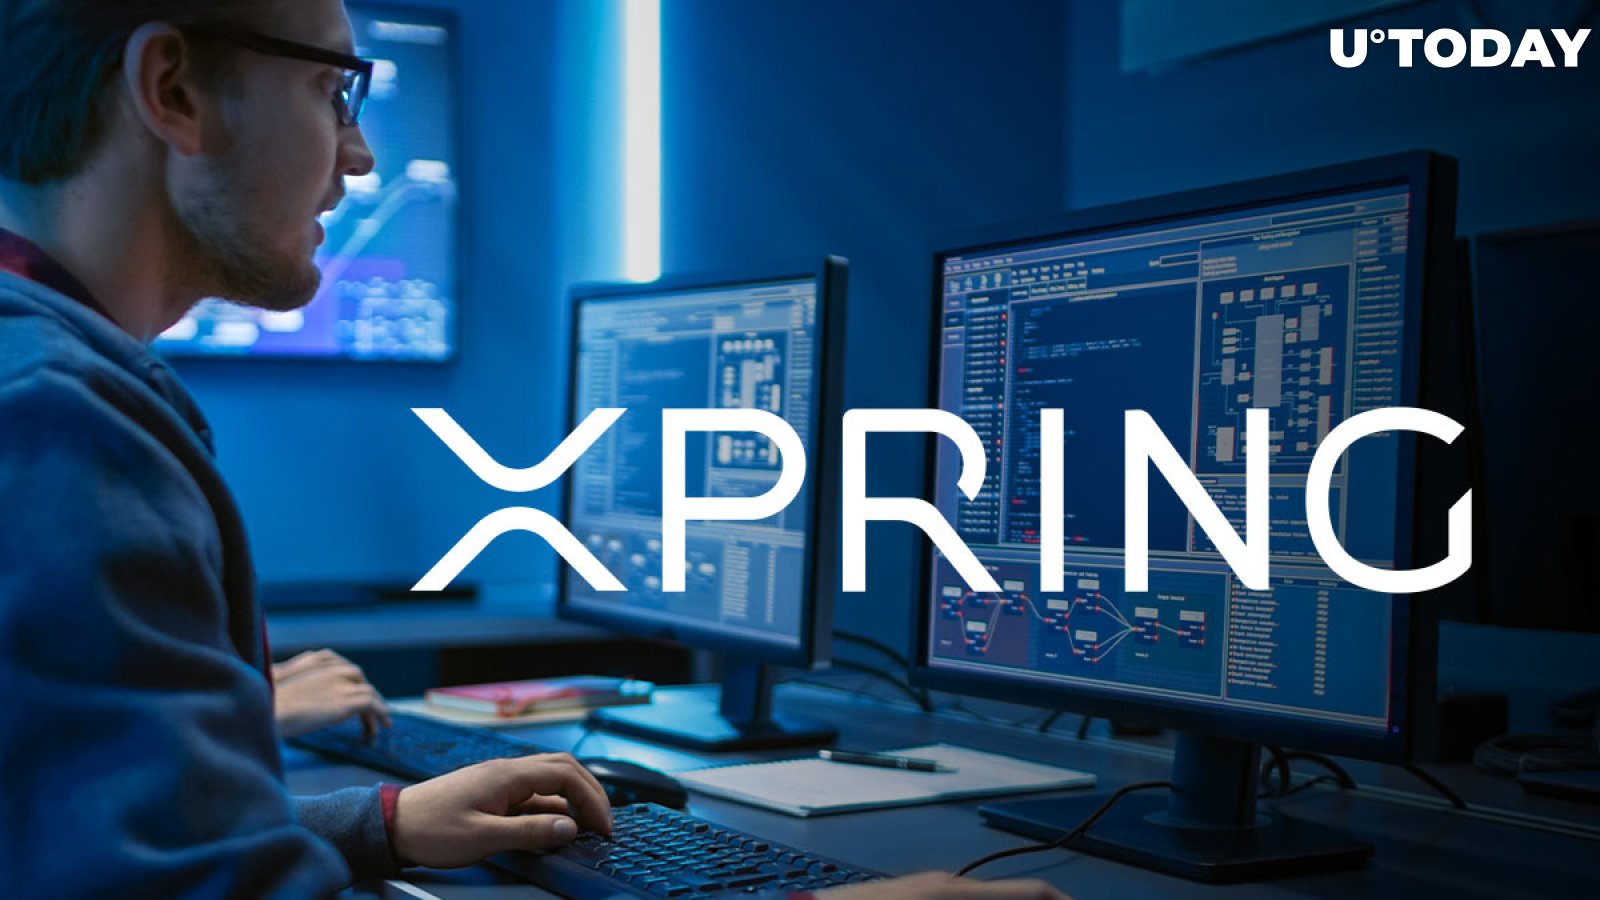 Xpring Platform Invites XRP Developers to New Initiative: Details